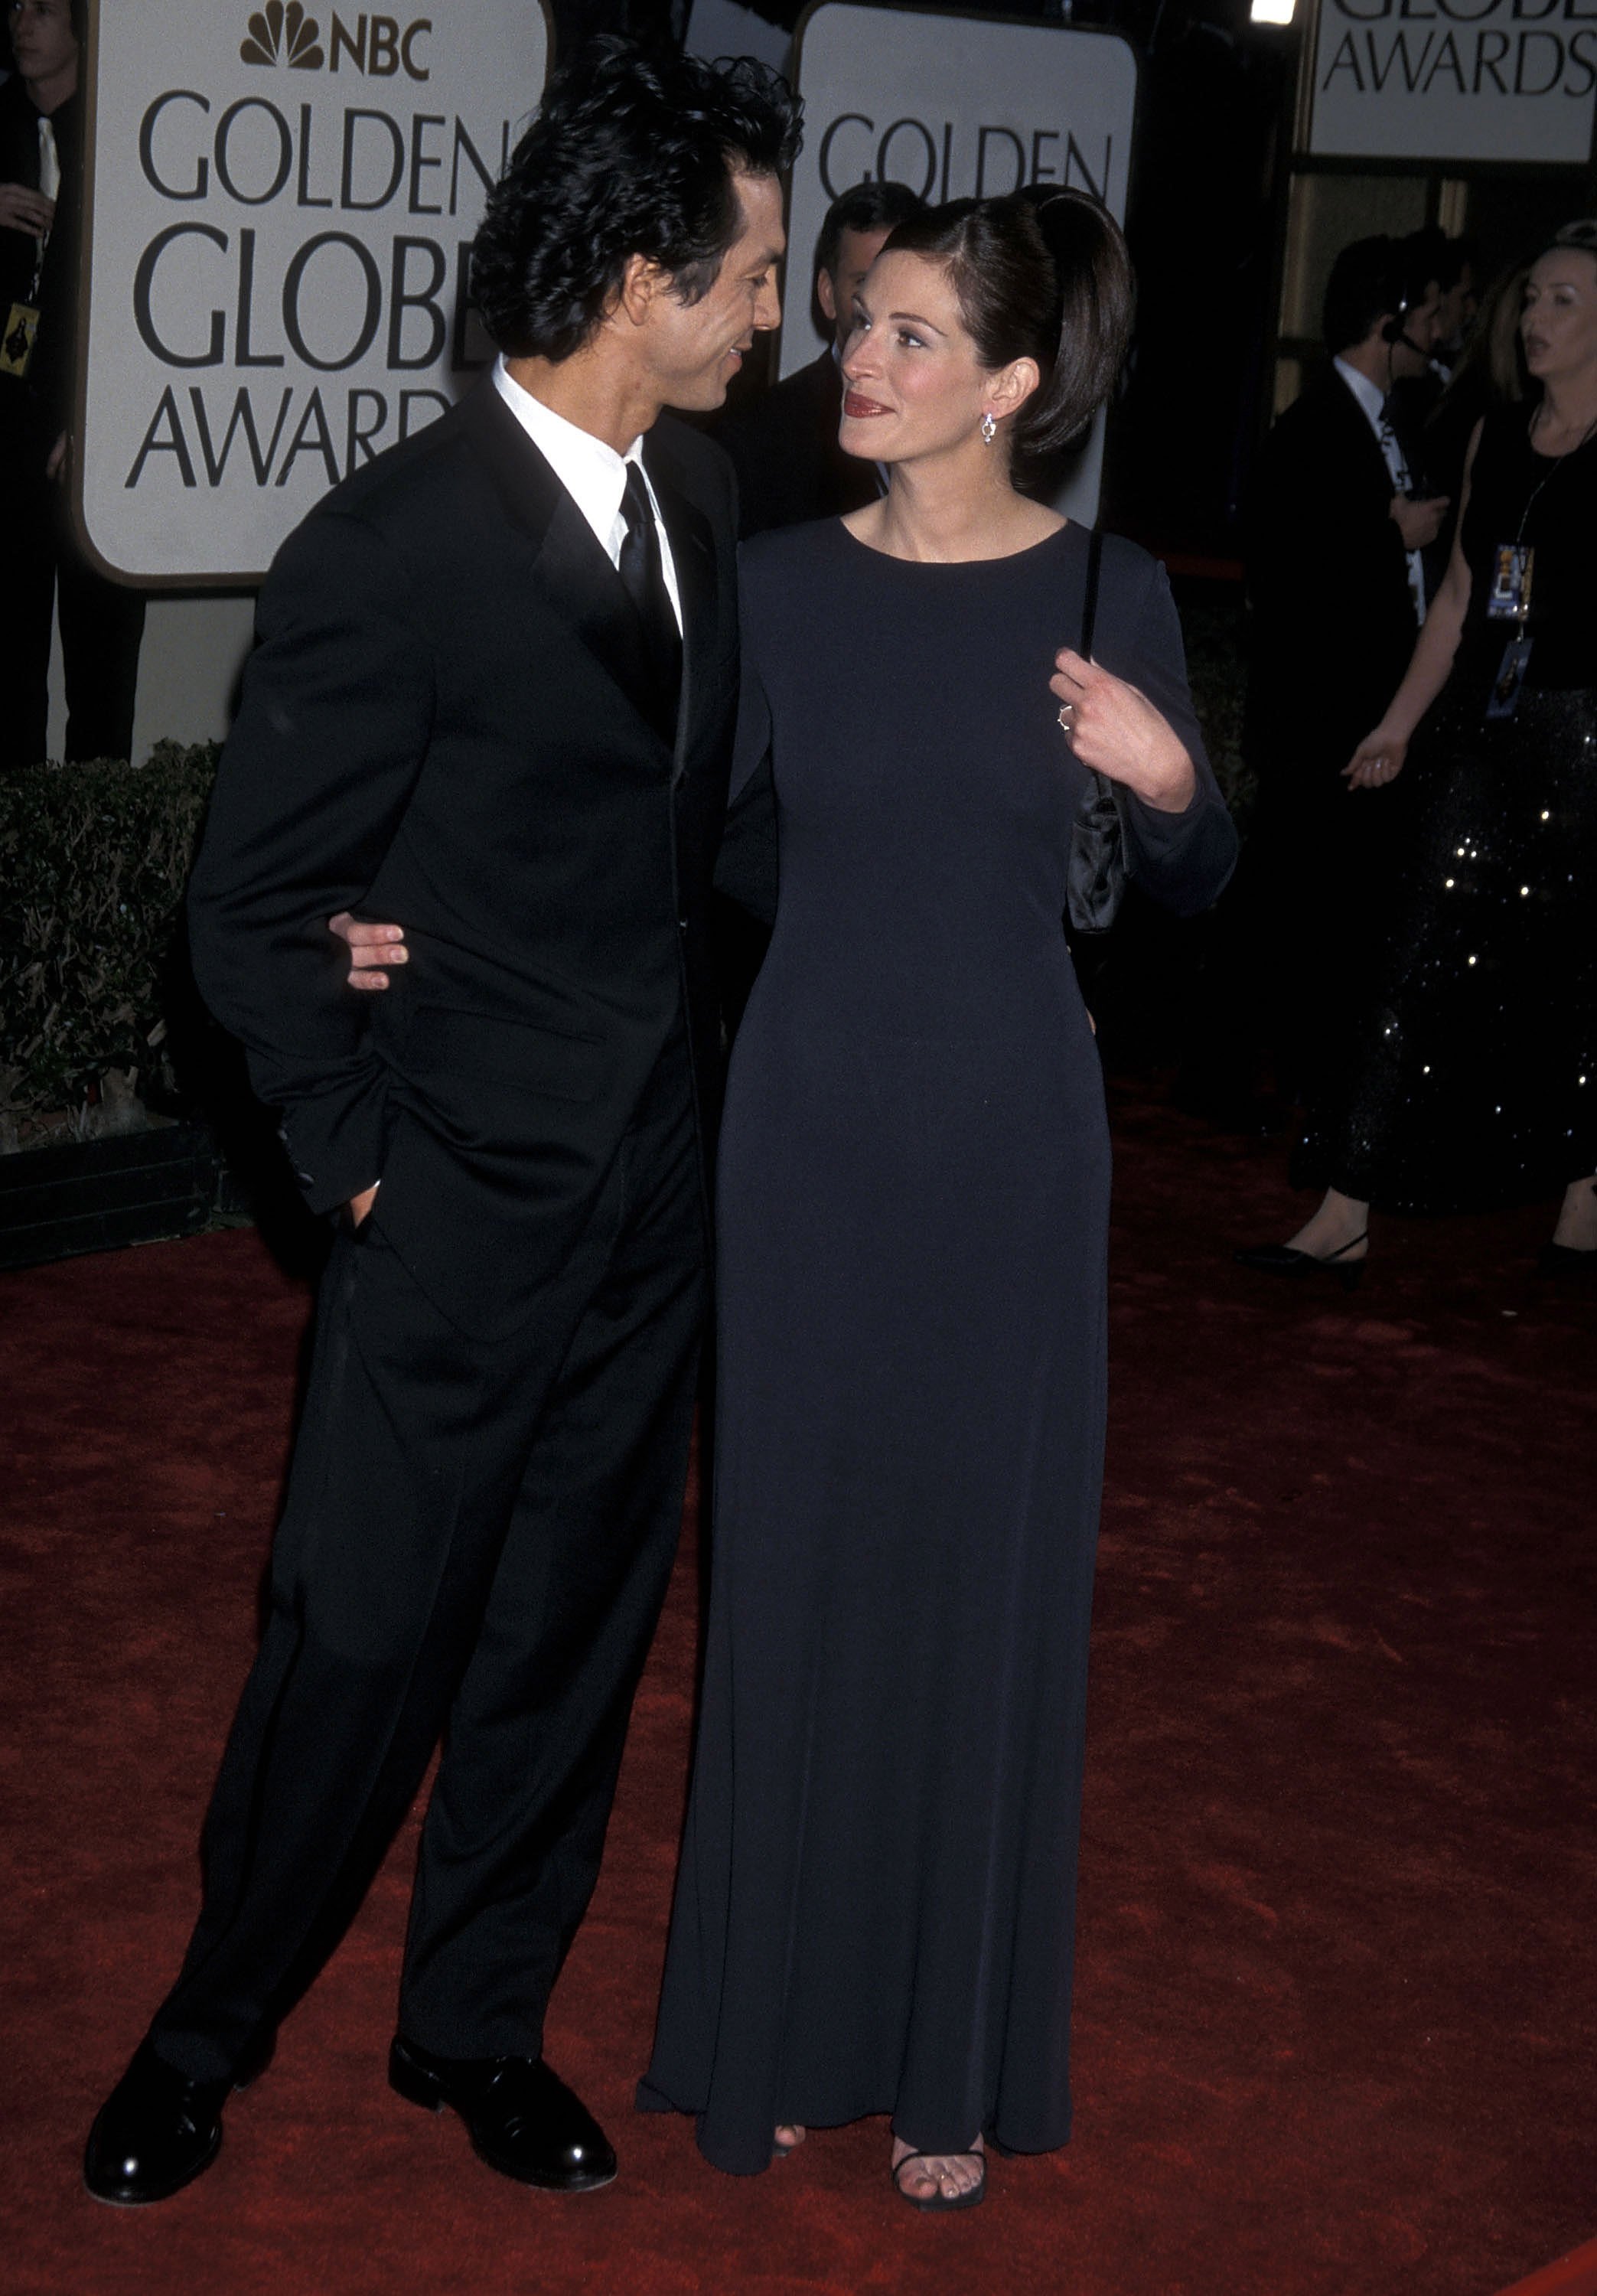 Actor Benjamin Bratt and actress Julia Roberts attend the 58th Annual Golden Globe Awards on January 21, 2001 at Beverly Hilton Hotel in Beverly Hills, California | Source: Getty Images